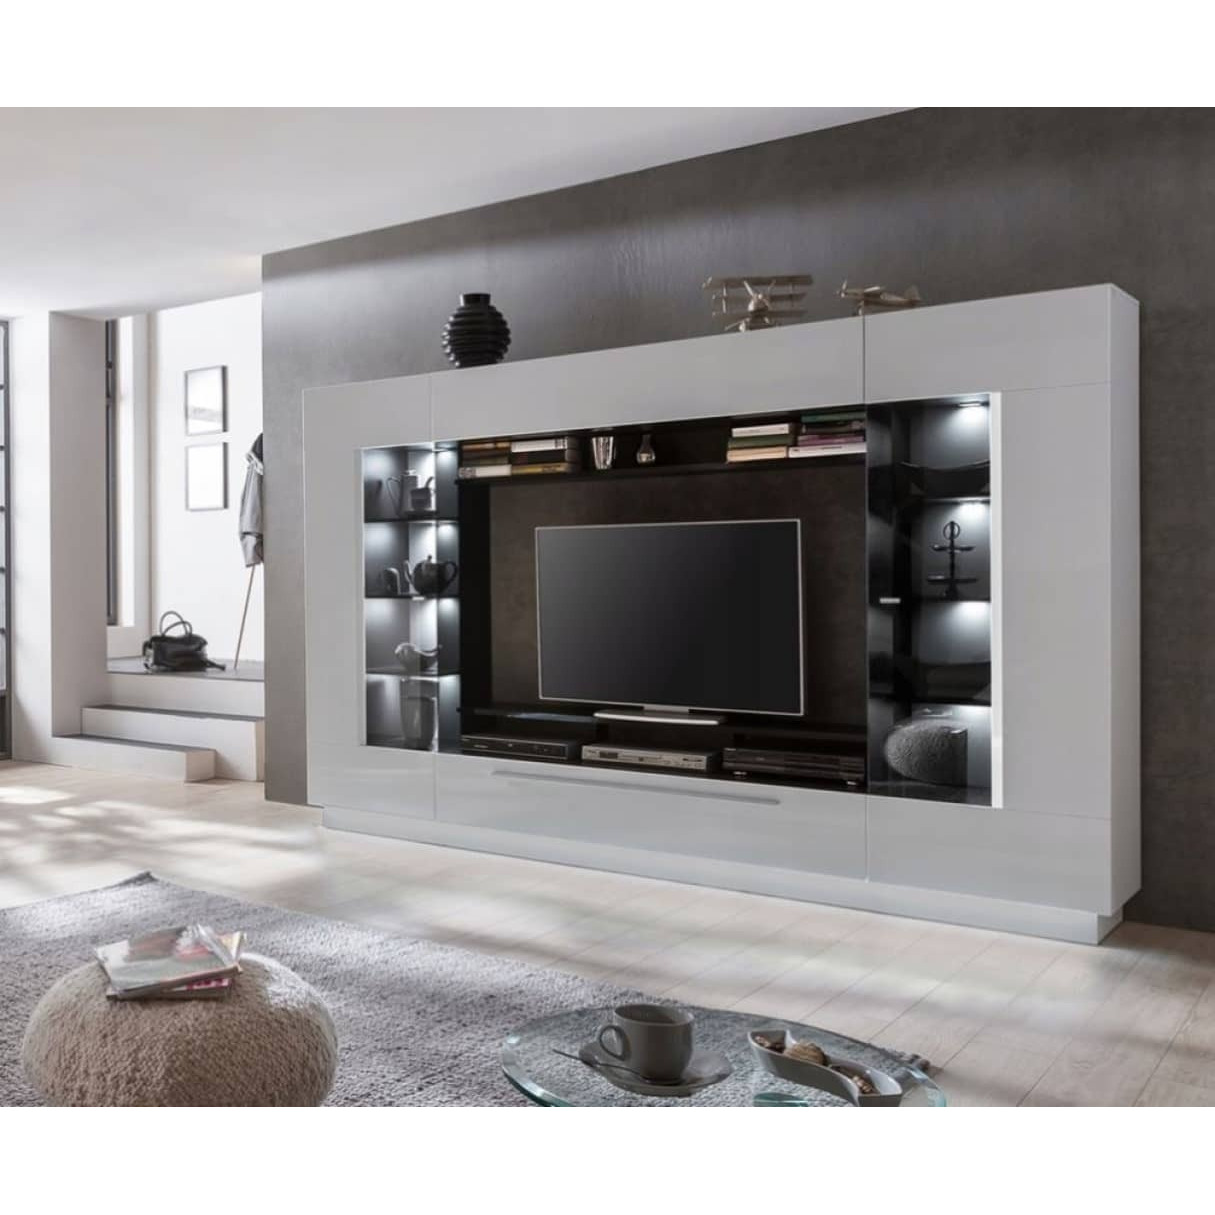 Sensis Entertainment Unit For TVs Up To 65” - White Gloss 275cm - image 1